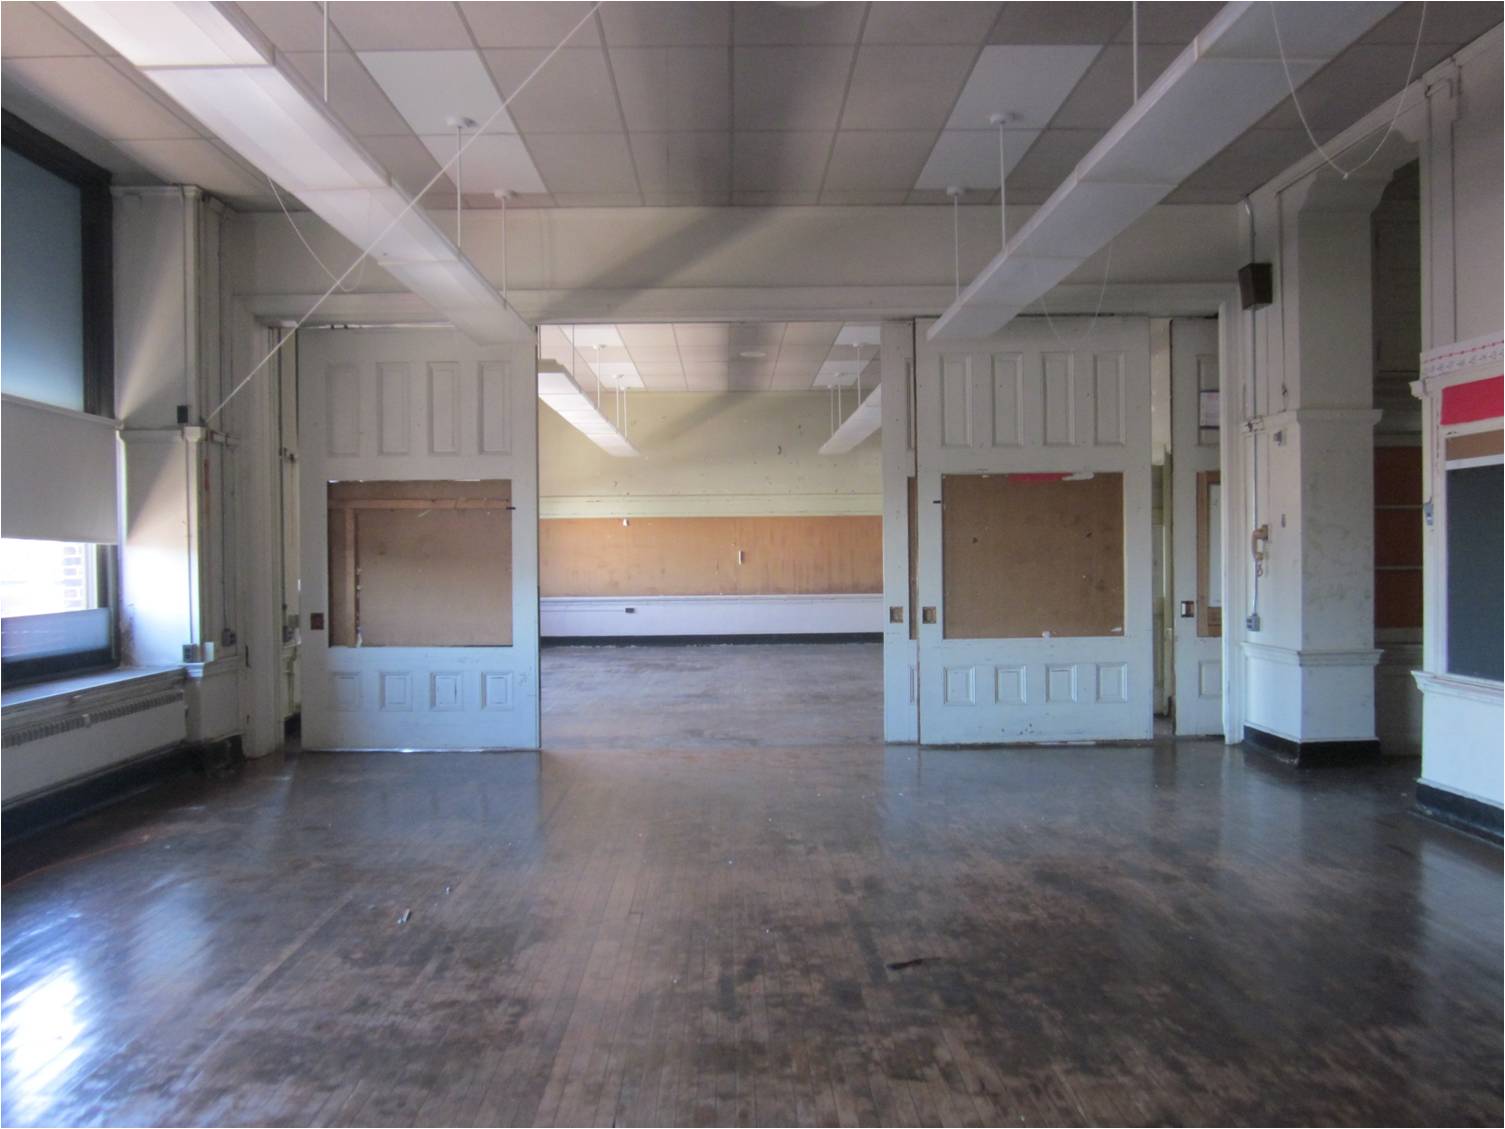 Old Frances Willard School has sliding classroom partitions, offering a flexible layout | courtesy of Community Design Collaborative